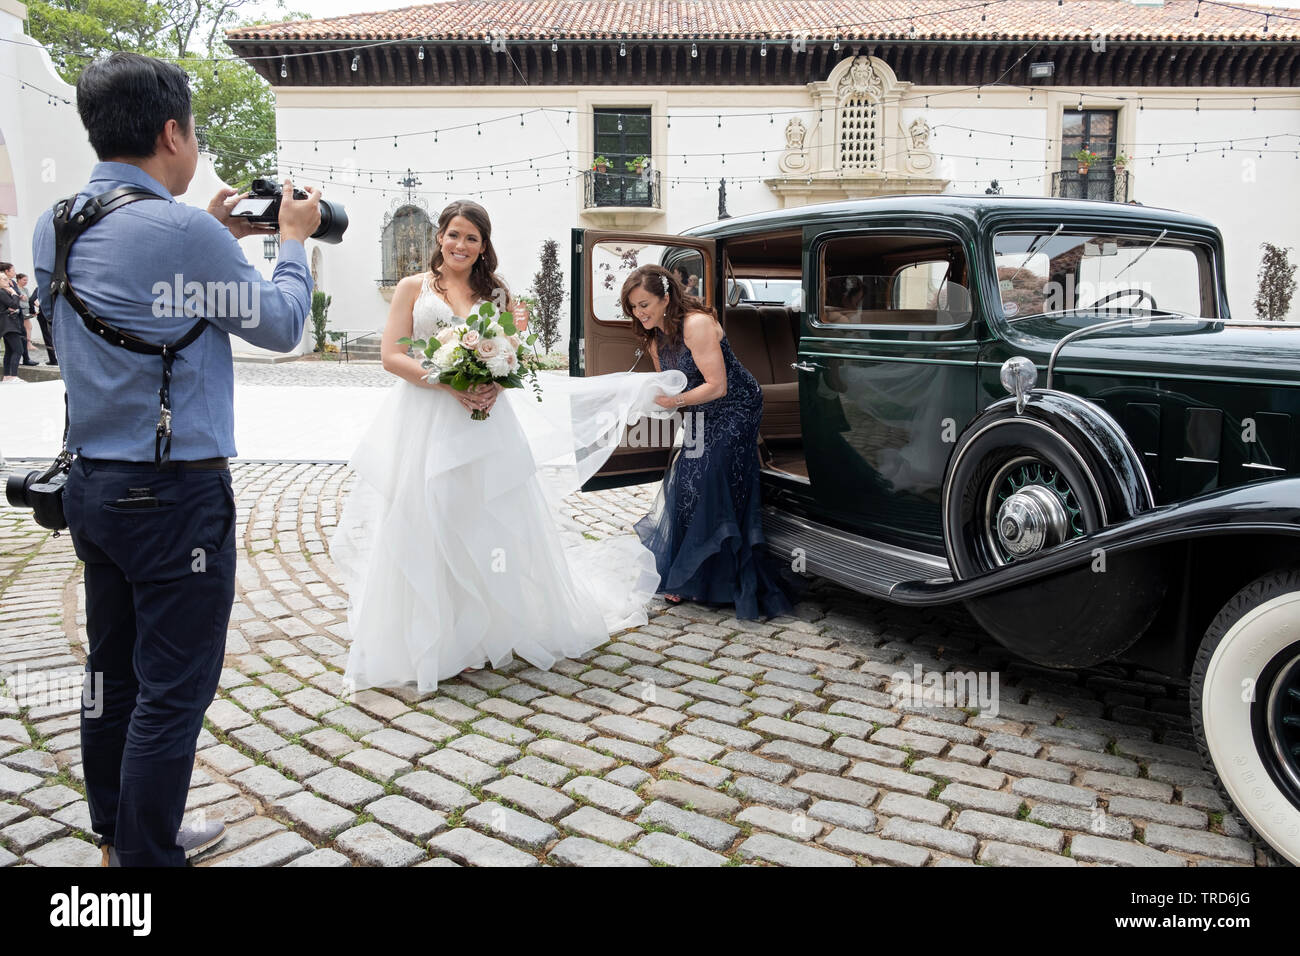 A bride emerges from a vintage 1932 Cadillac & her mother adjusts her wedding dress. At the Vanderbilt Mansion in Centerport, Long Island, New York. Stock Photo